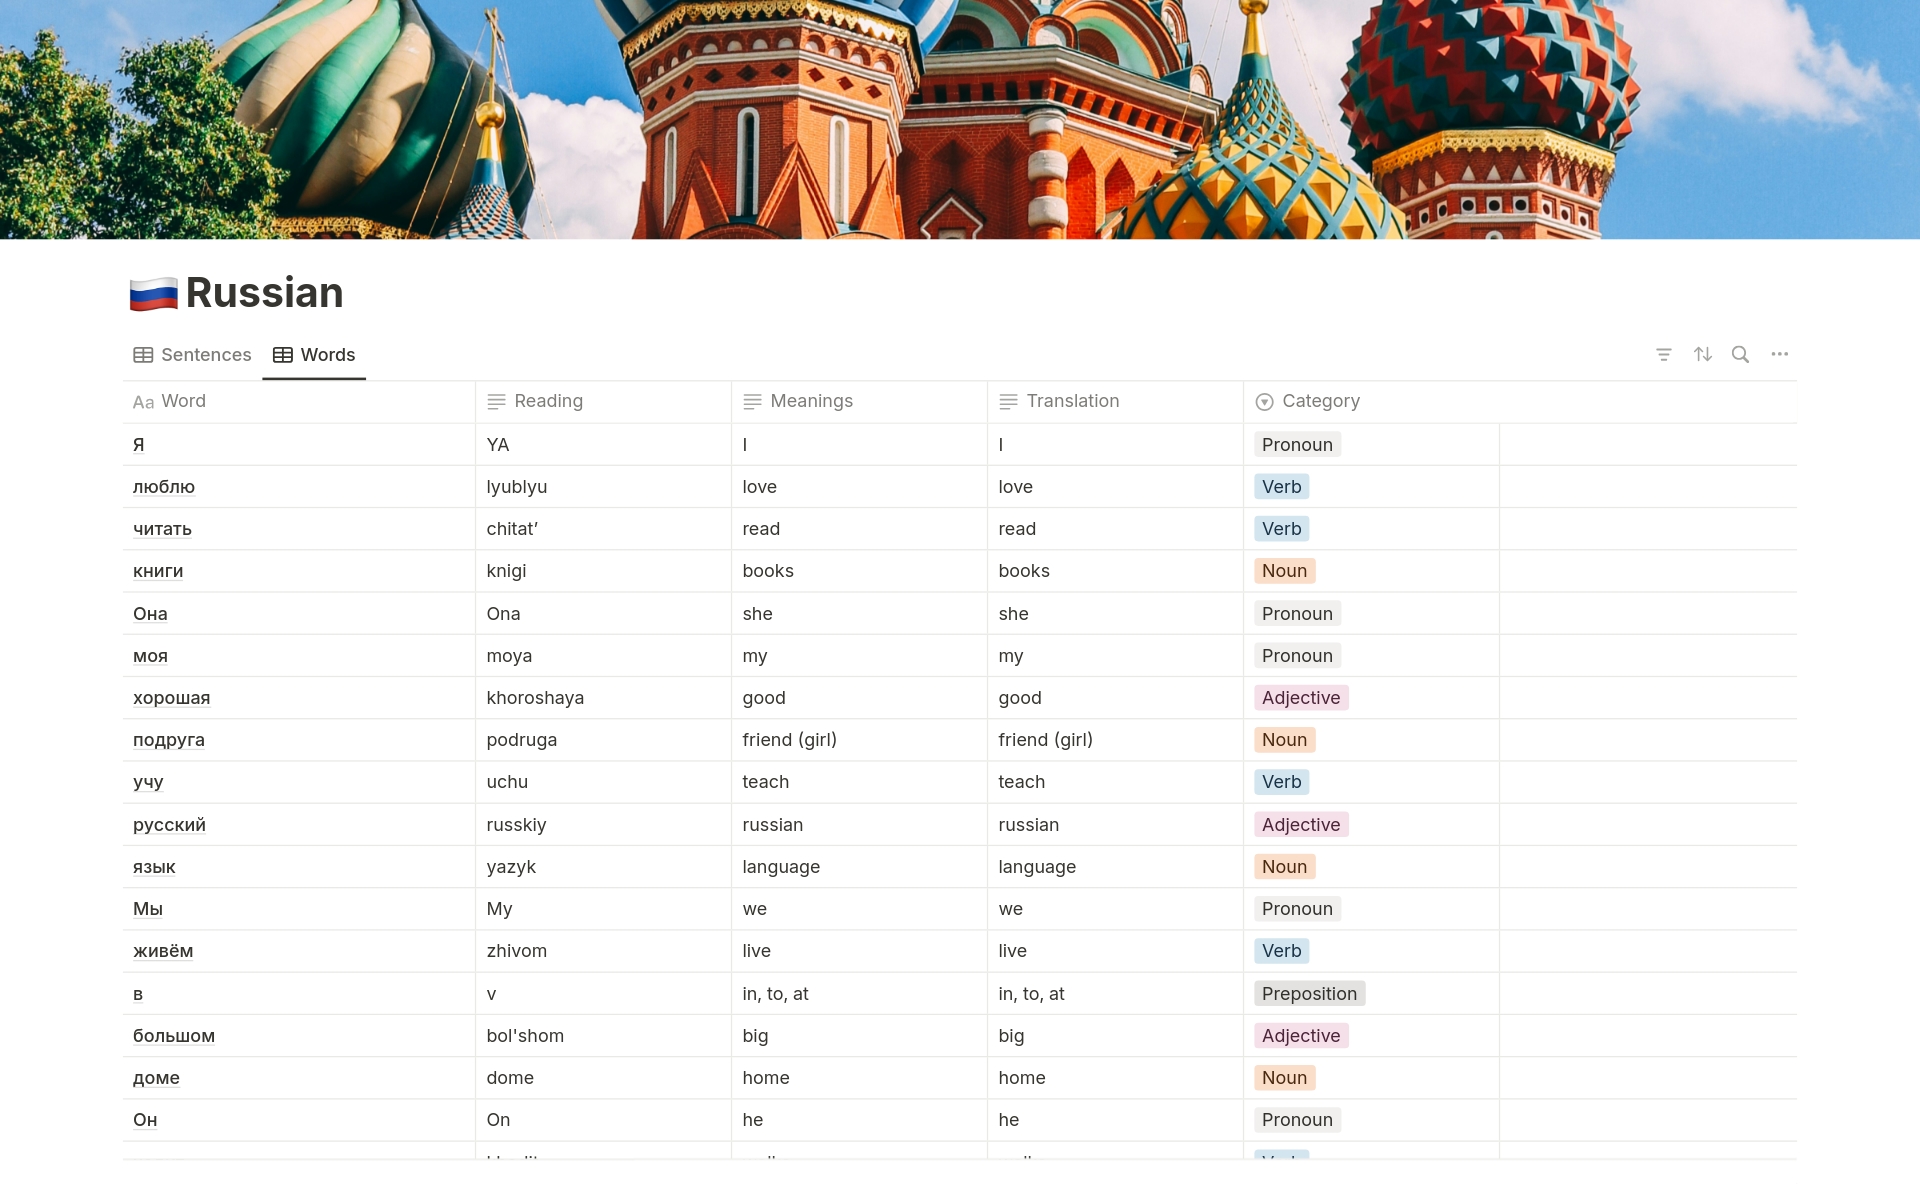 Explore the world of the Russian language in an organized and efficient way with our exclusive Notion template for Russian language learning! This vocabulary system is designed for those who want to master Russian in a systematic and interactive manner.